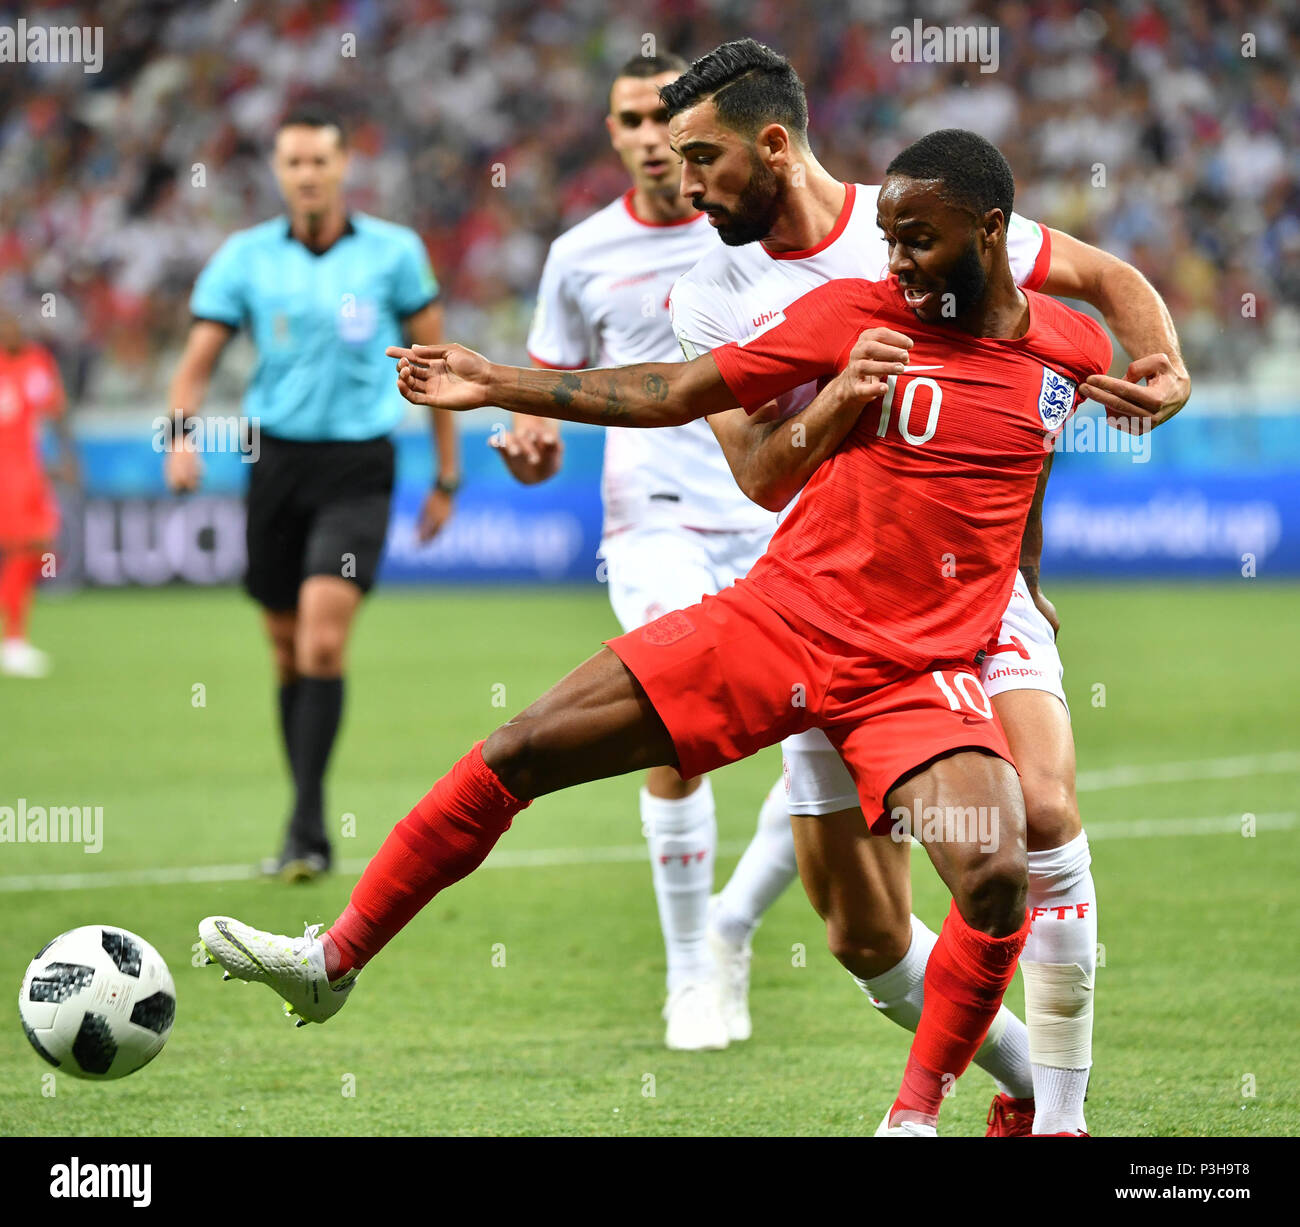 Volgograd, Russia. 18th June, 2018. Raheem Sterling (front) of England vies with Yassine Meriah of Tunisia during a group G match between Tunisia and England at the 2018 FIFA World Cup in Volgograd, Russia, June 18, 2018. Credit: Liu Dawei/Xinhua/Alamy Live News Stock Photo